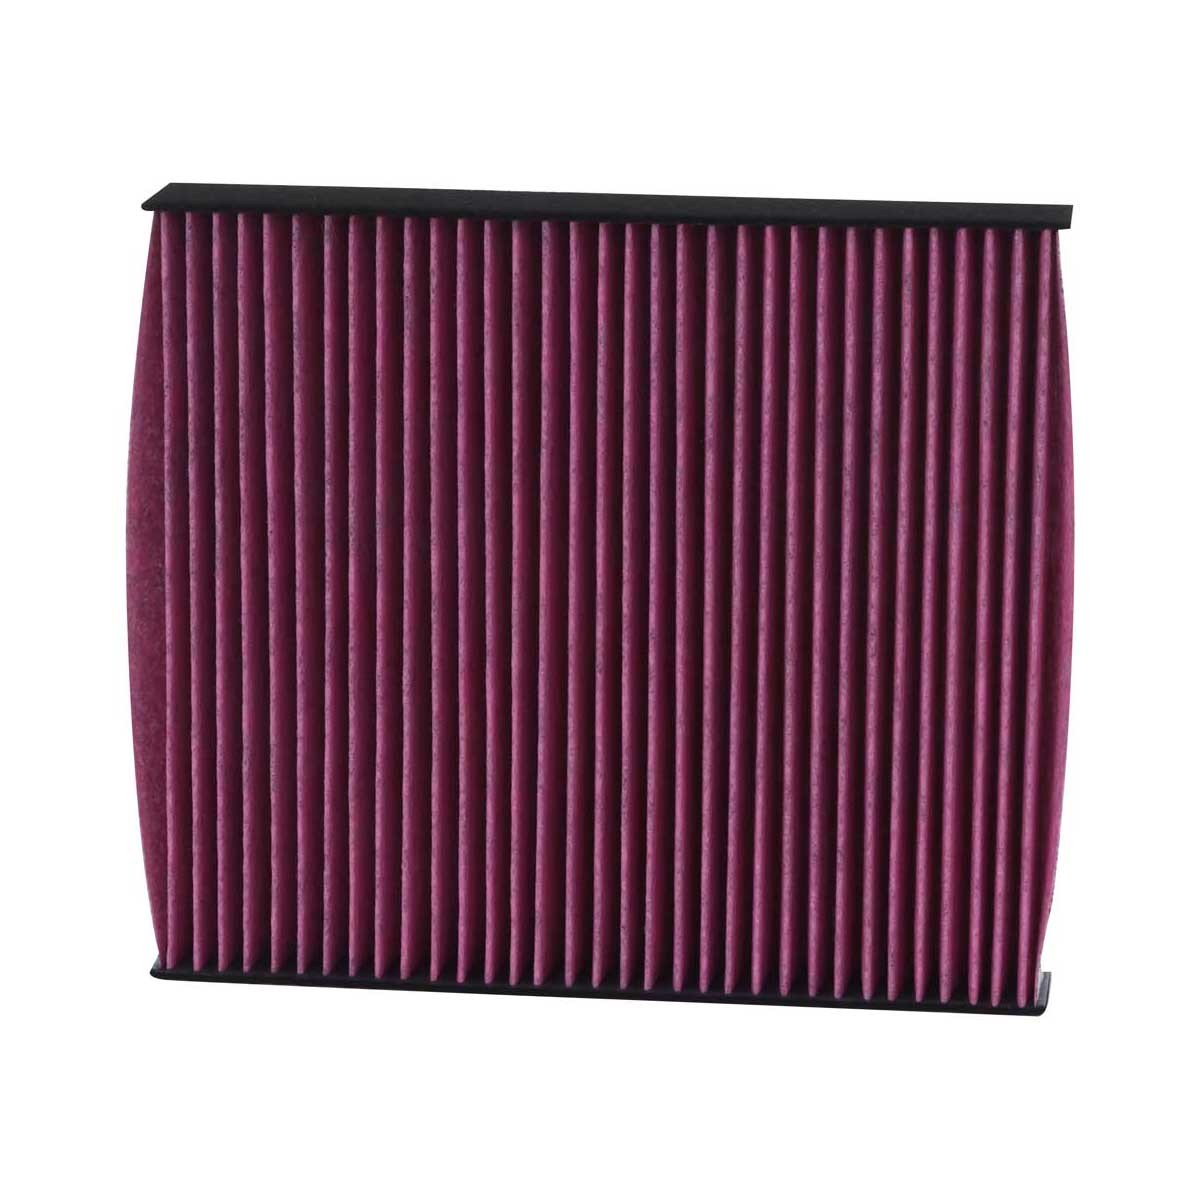 Mercedes C-Class Aircon filter 21502850 K&N Filters DVF5003 online buy